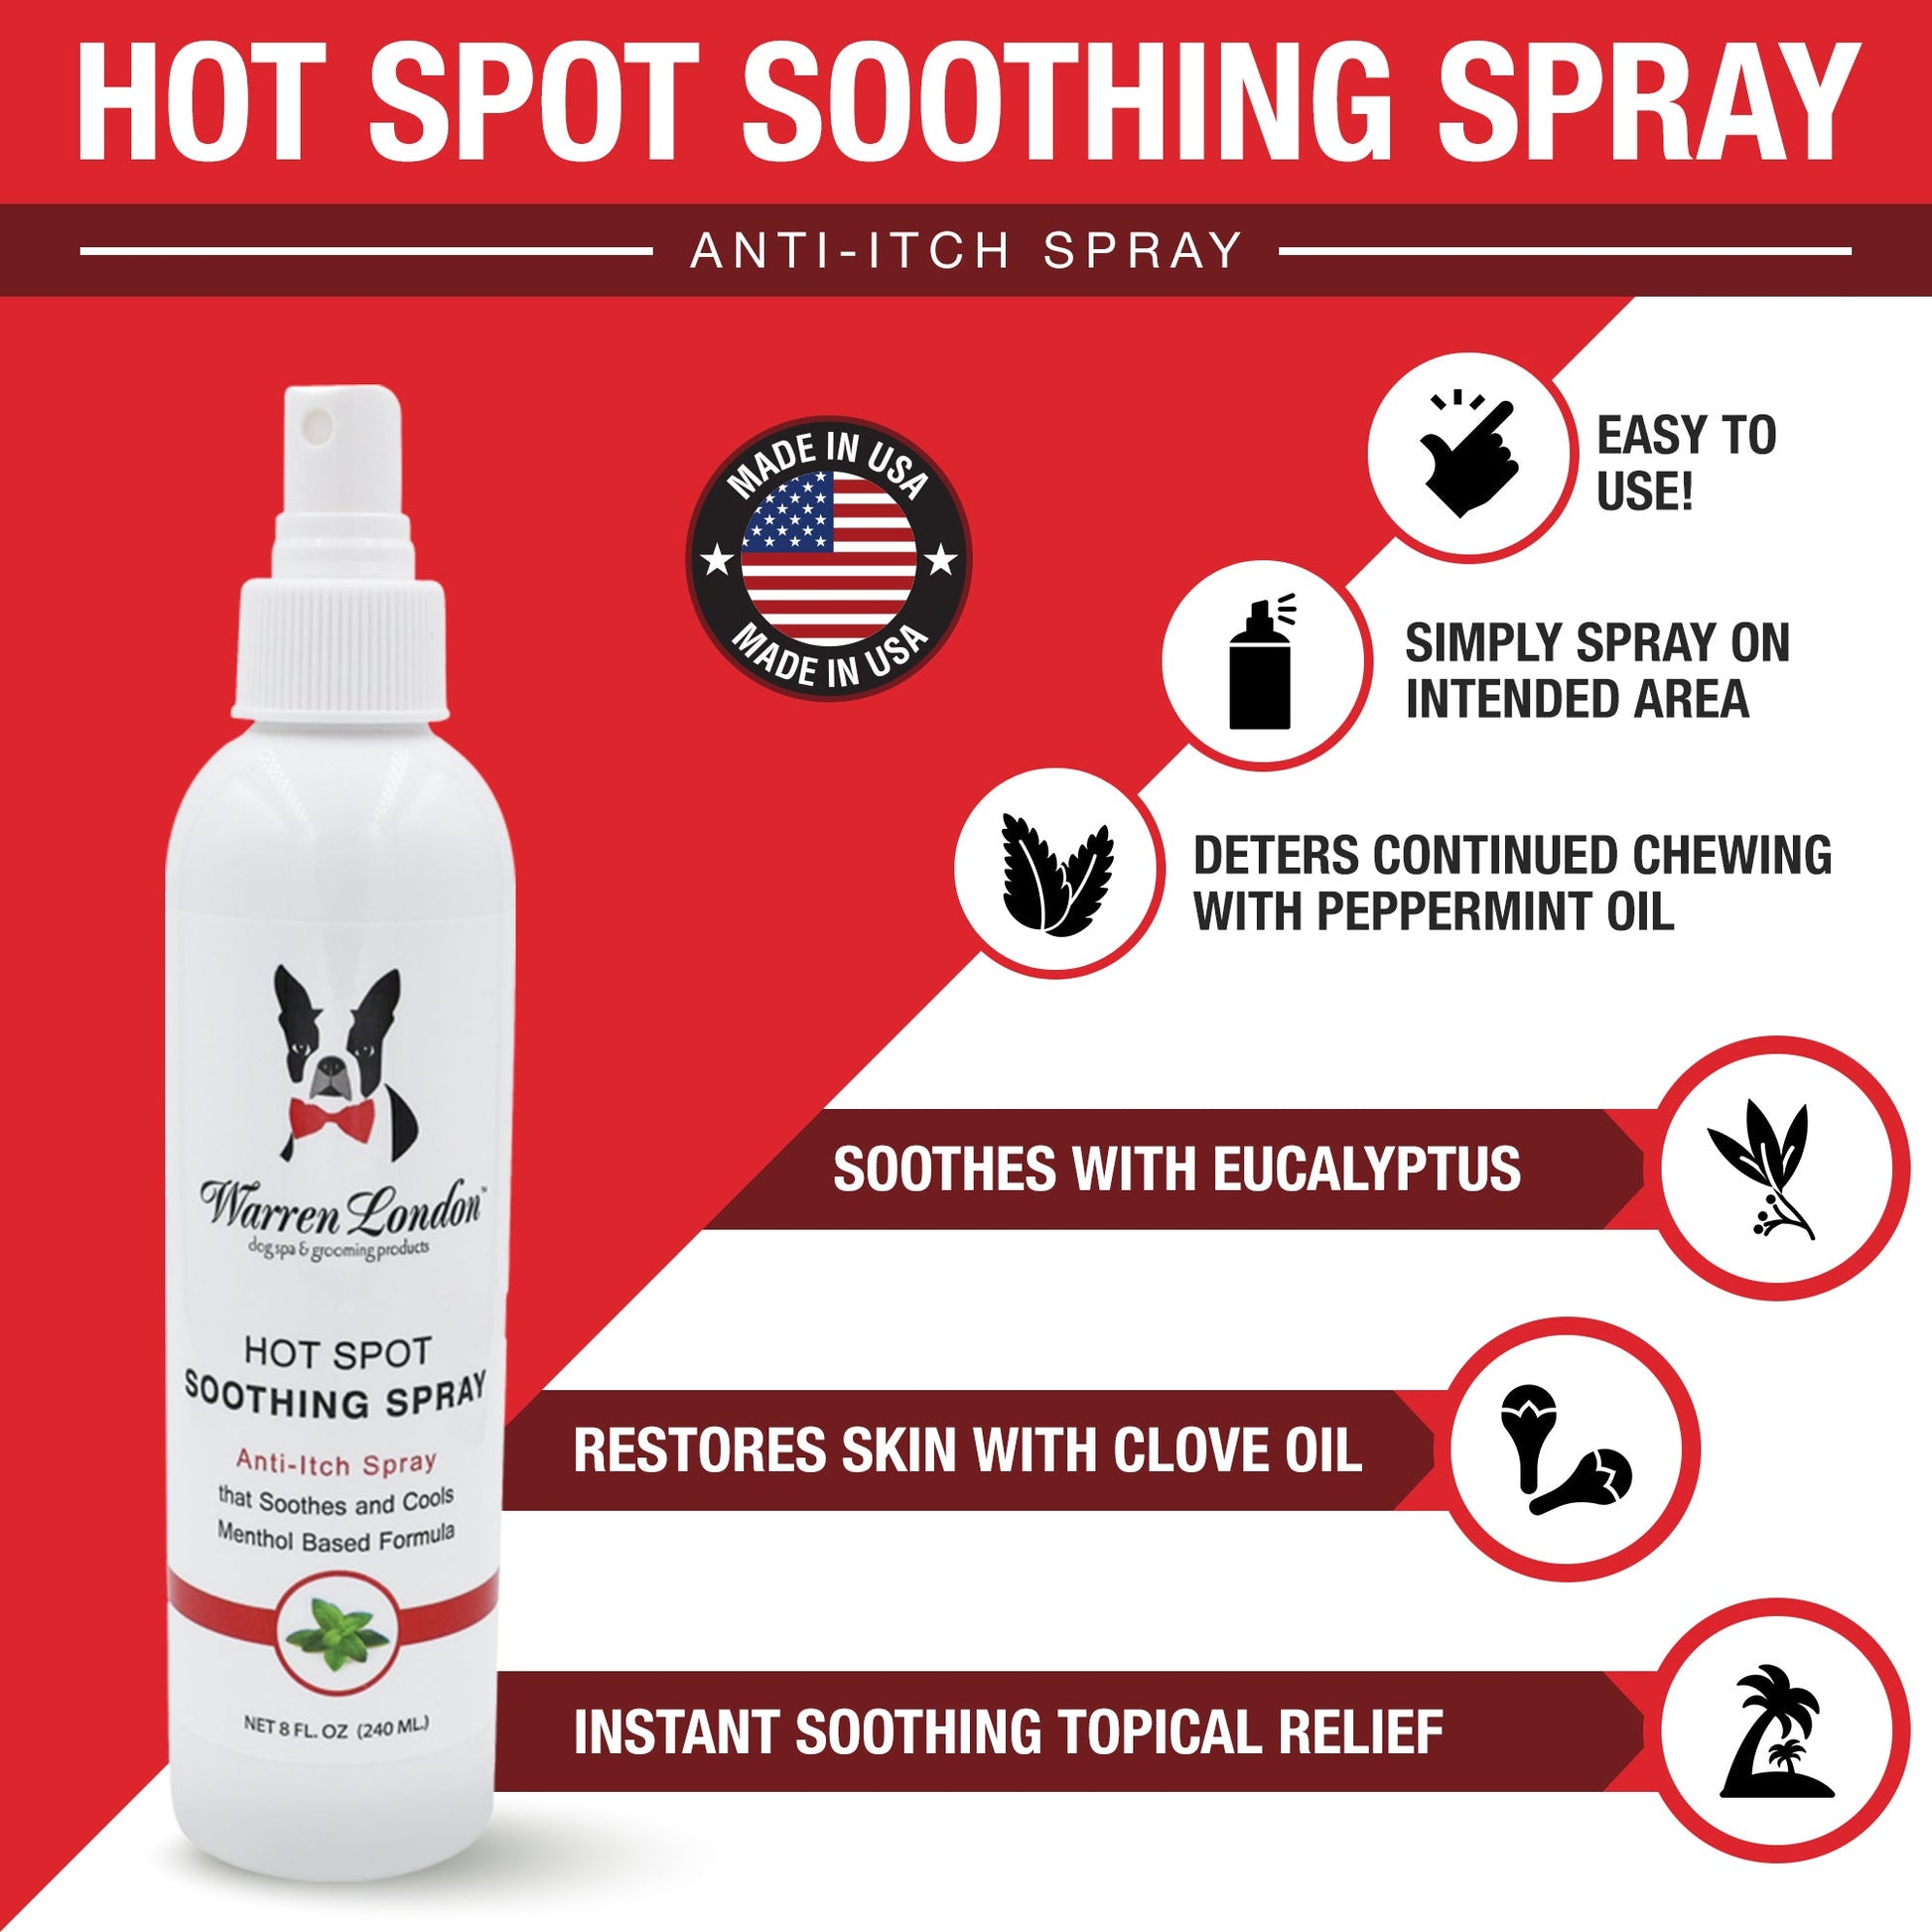 Hot Spot Soothing Spray - Anti Itch Spray That Soothes And Cools Spa Product Warren London 